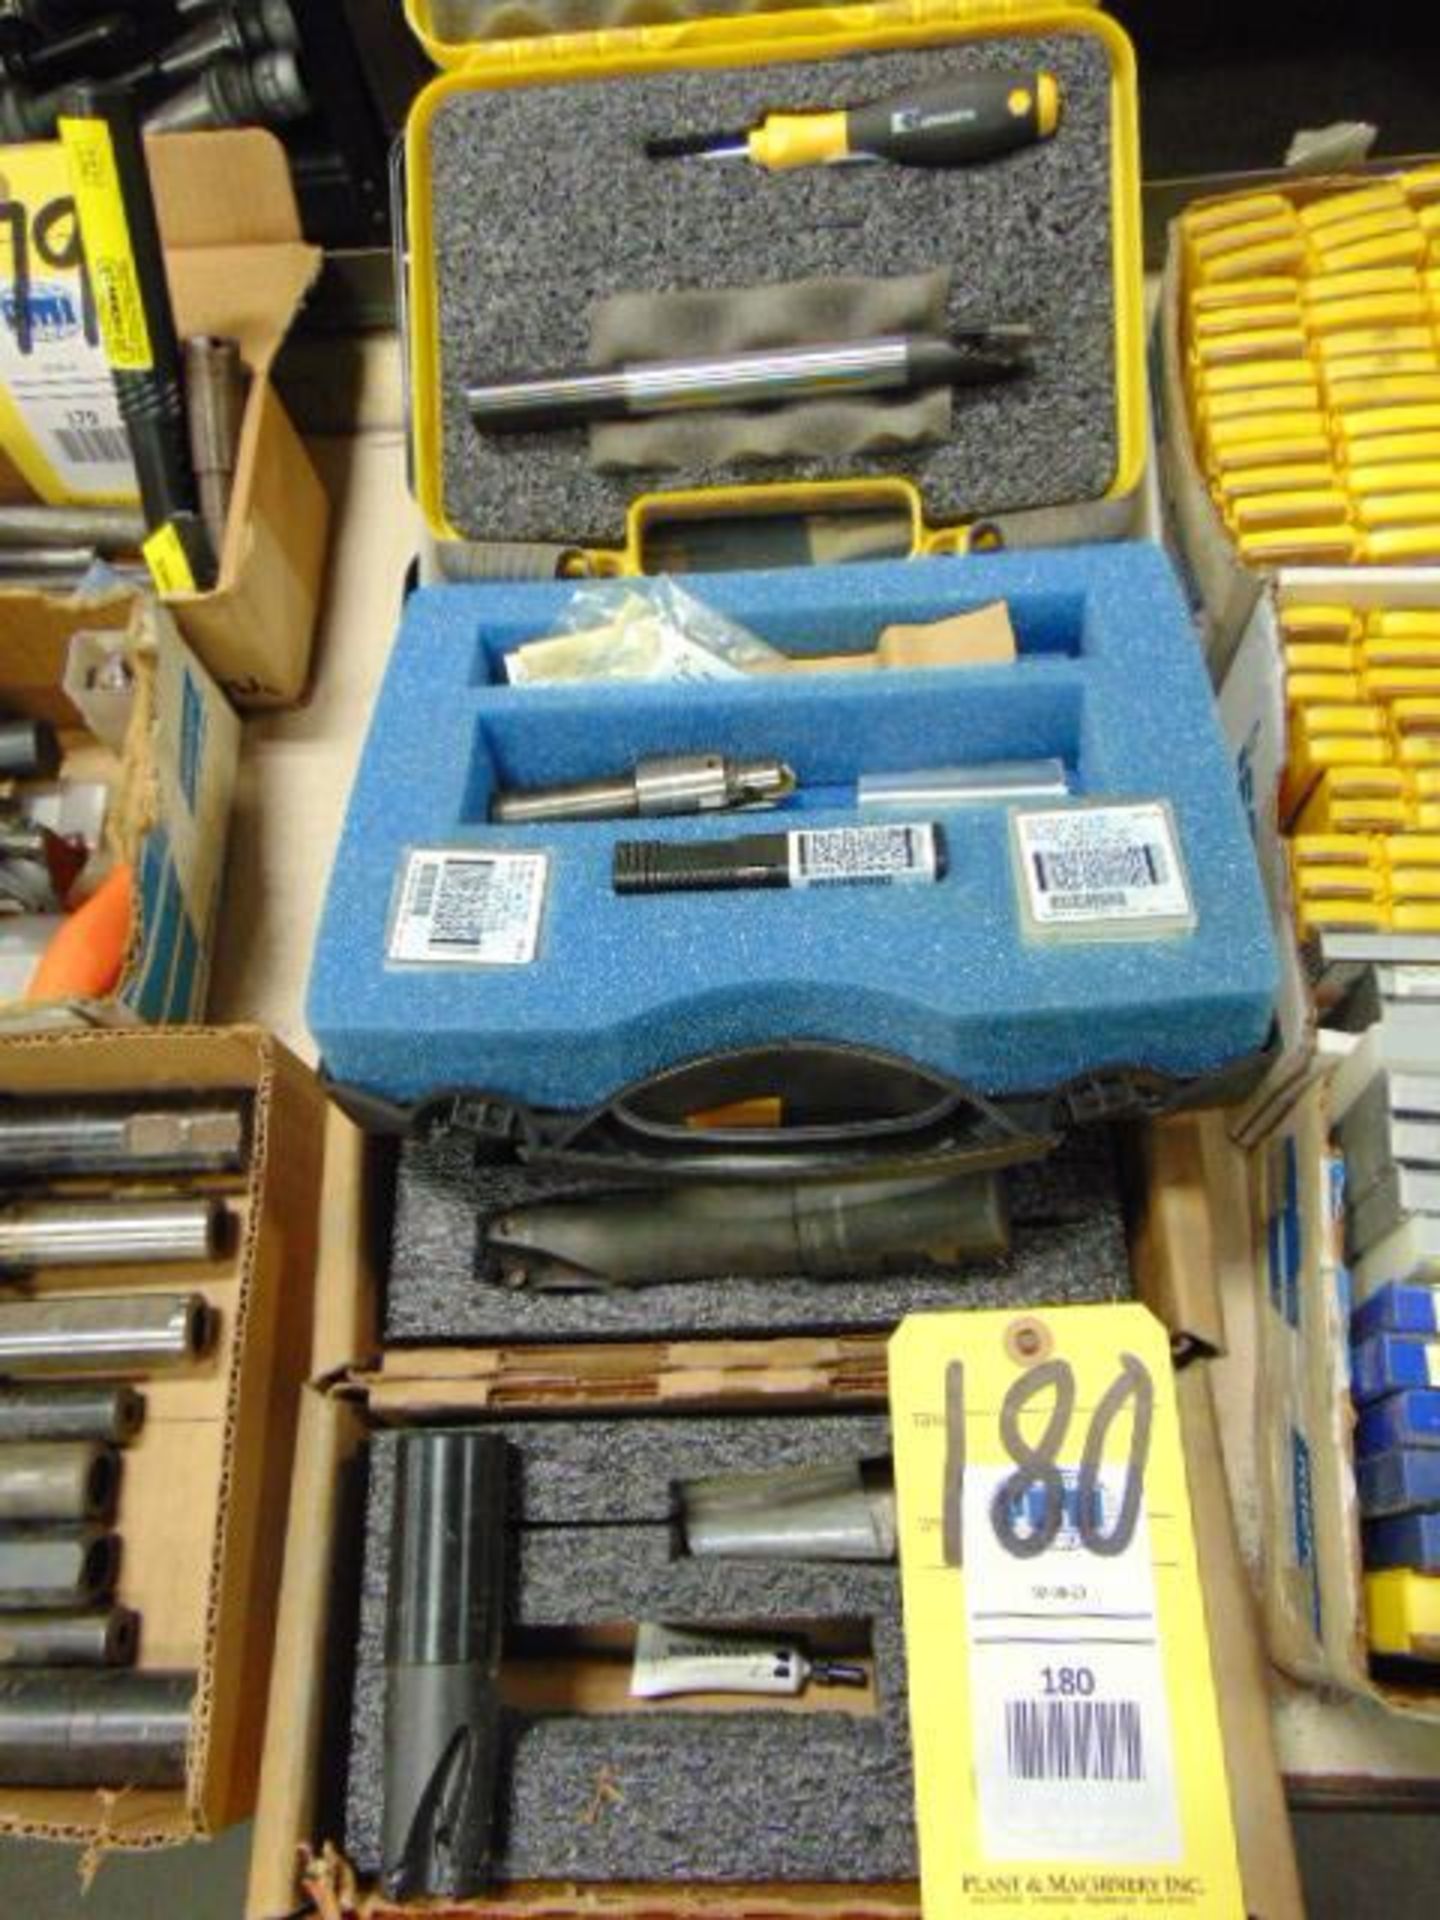 LOT OF INSERT TOOL HOLDERS (4), assorted (in one box)